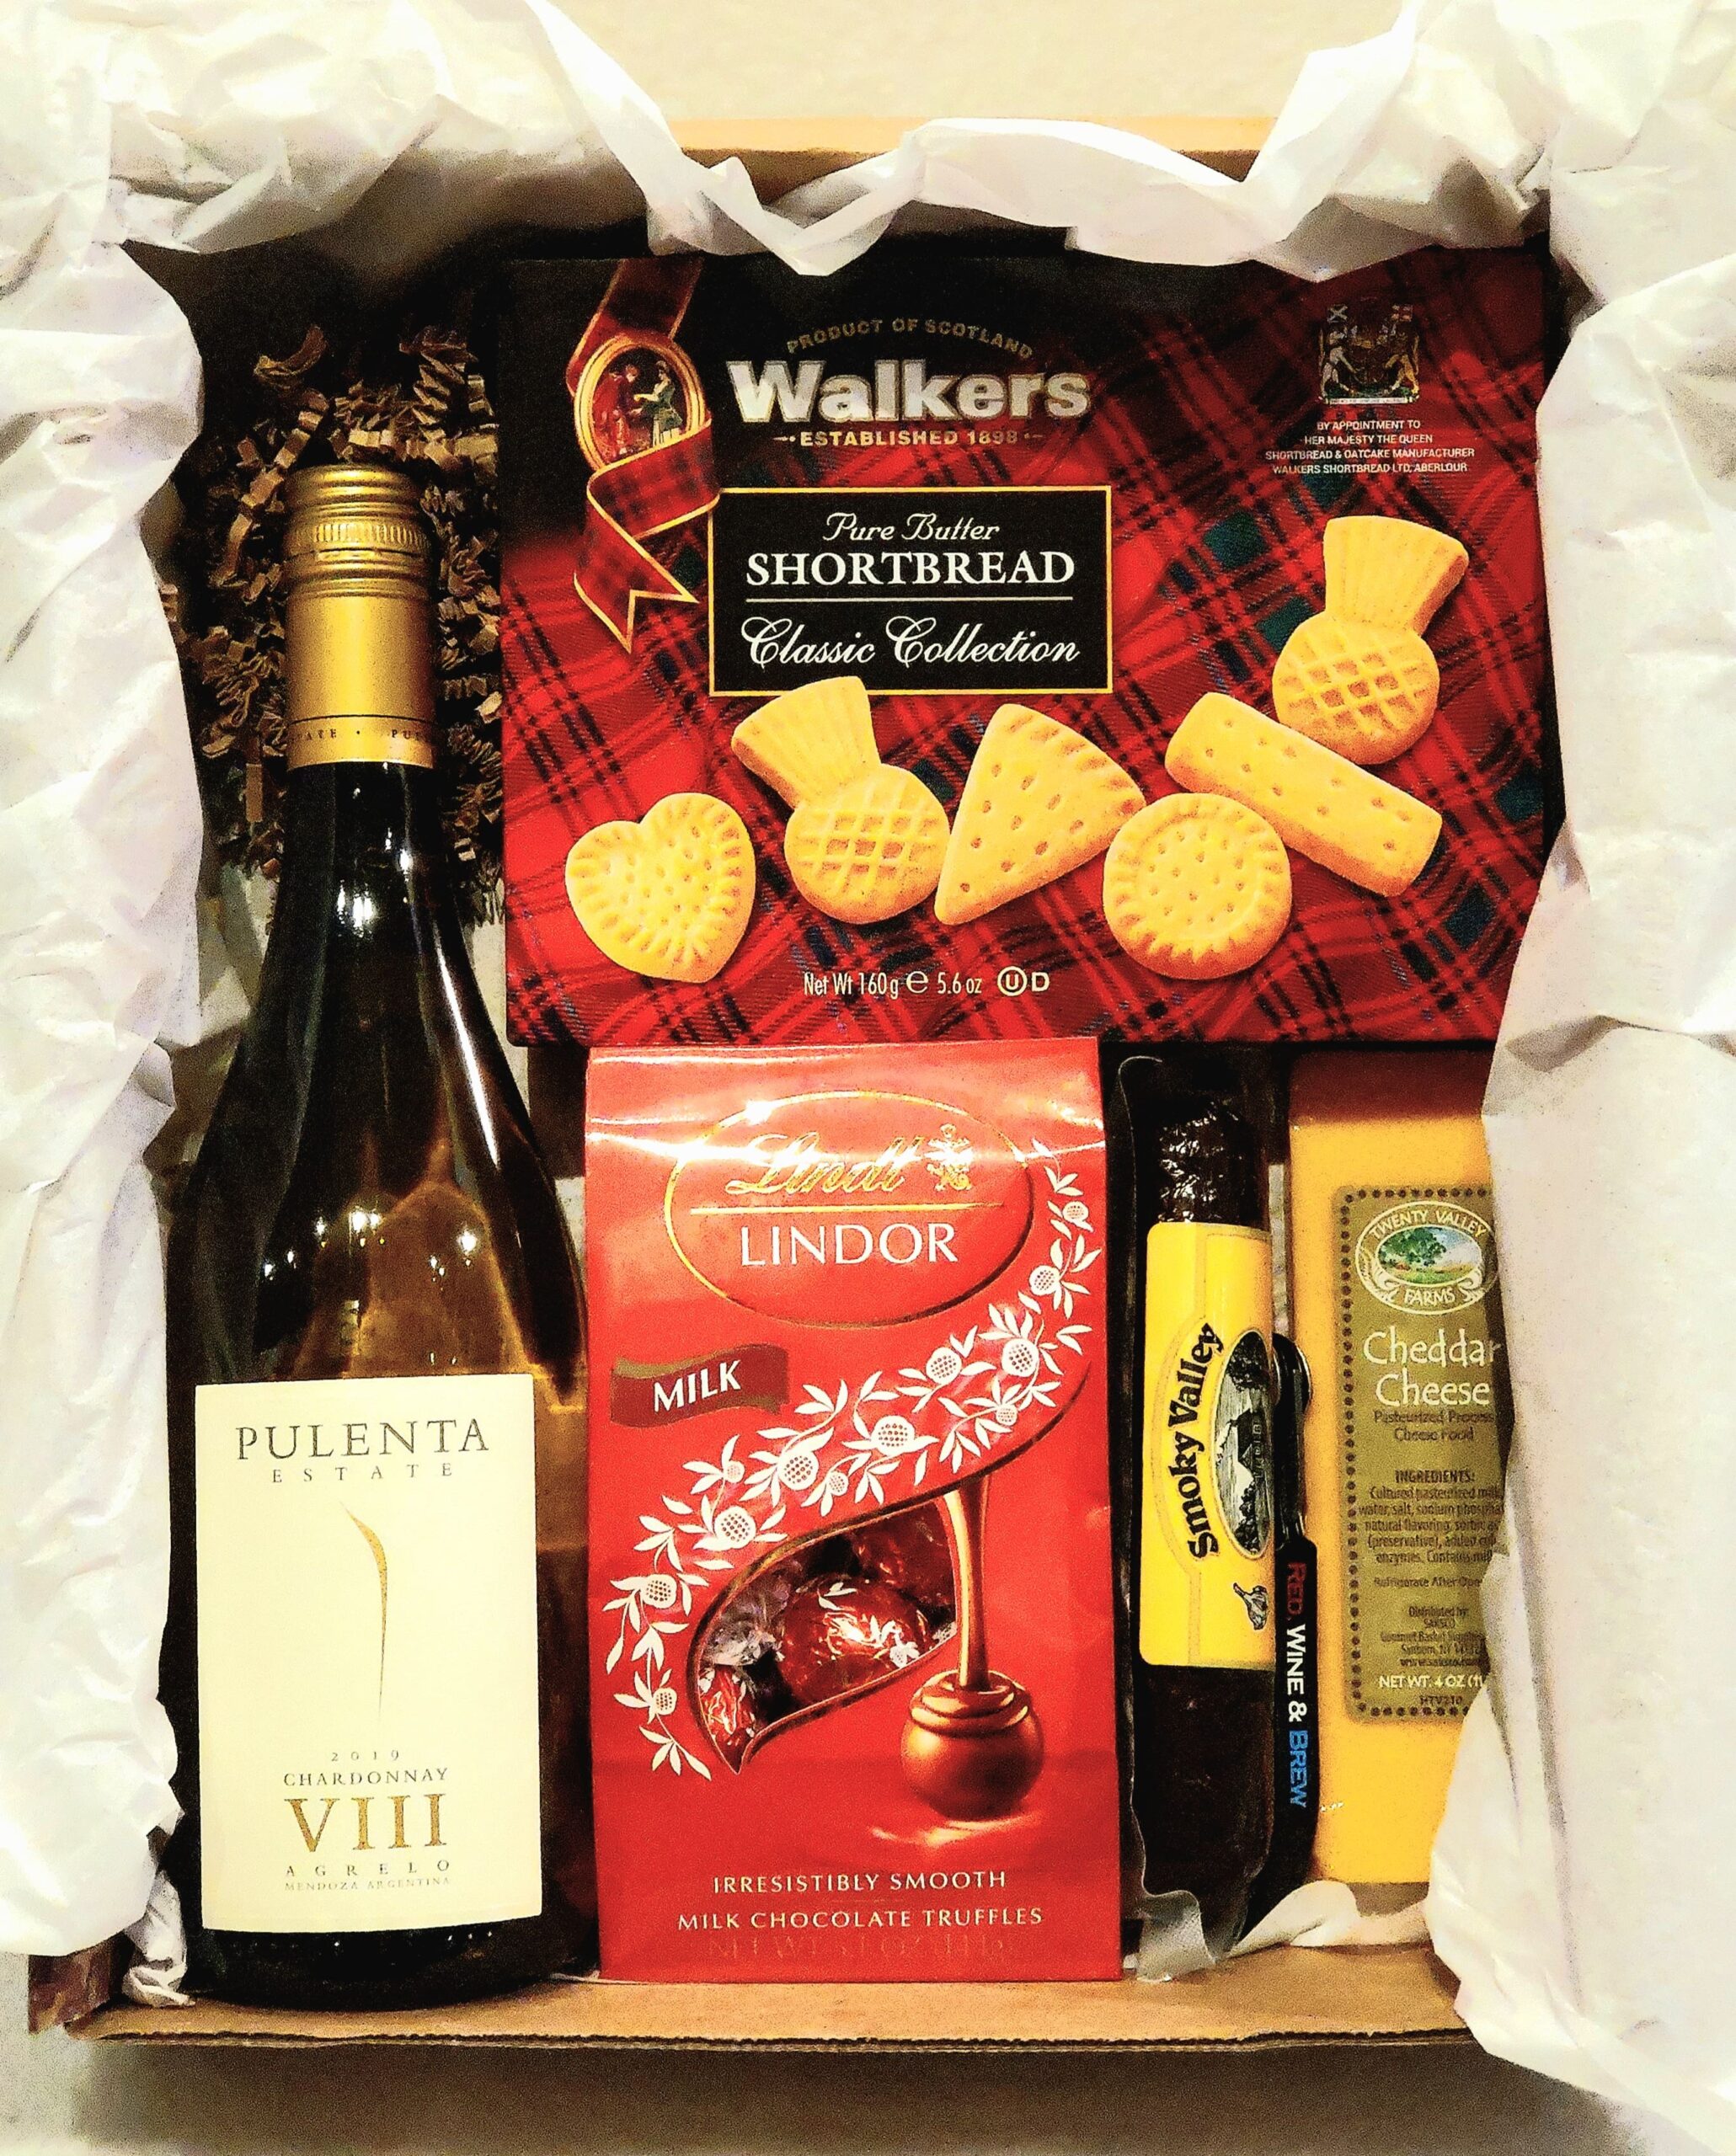 A giftbox with chocolates, assorted snacks, and cookies.